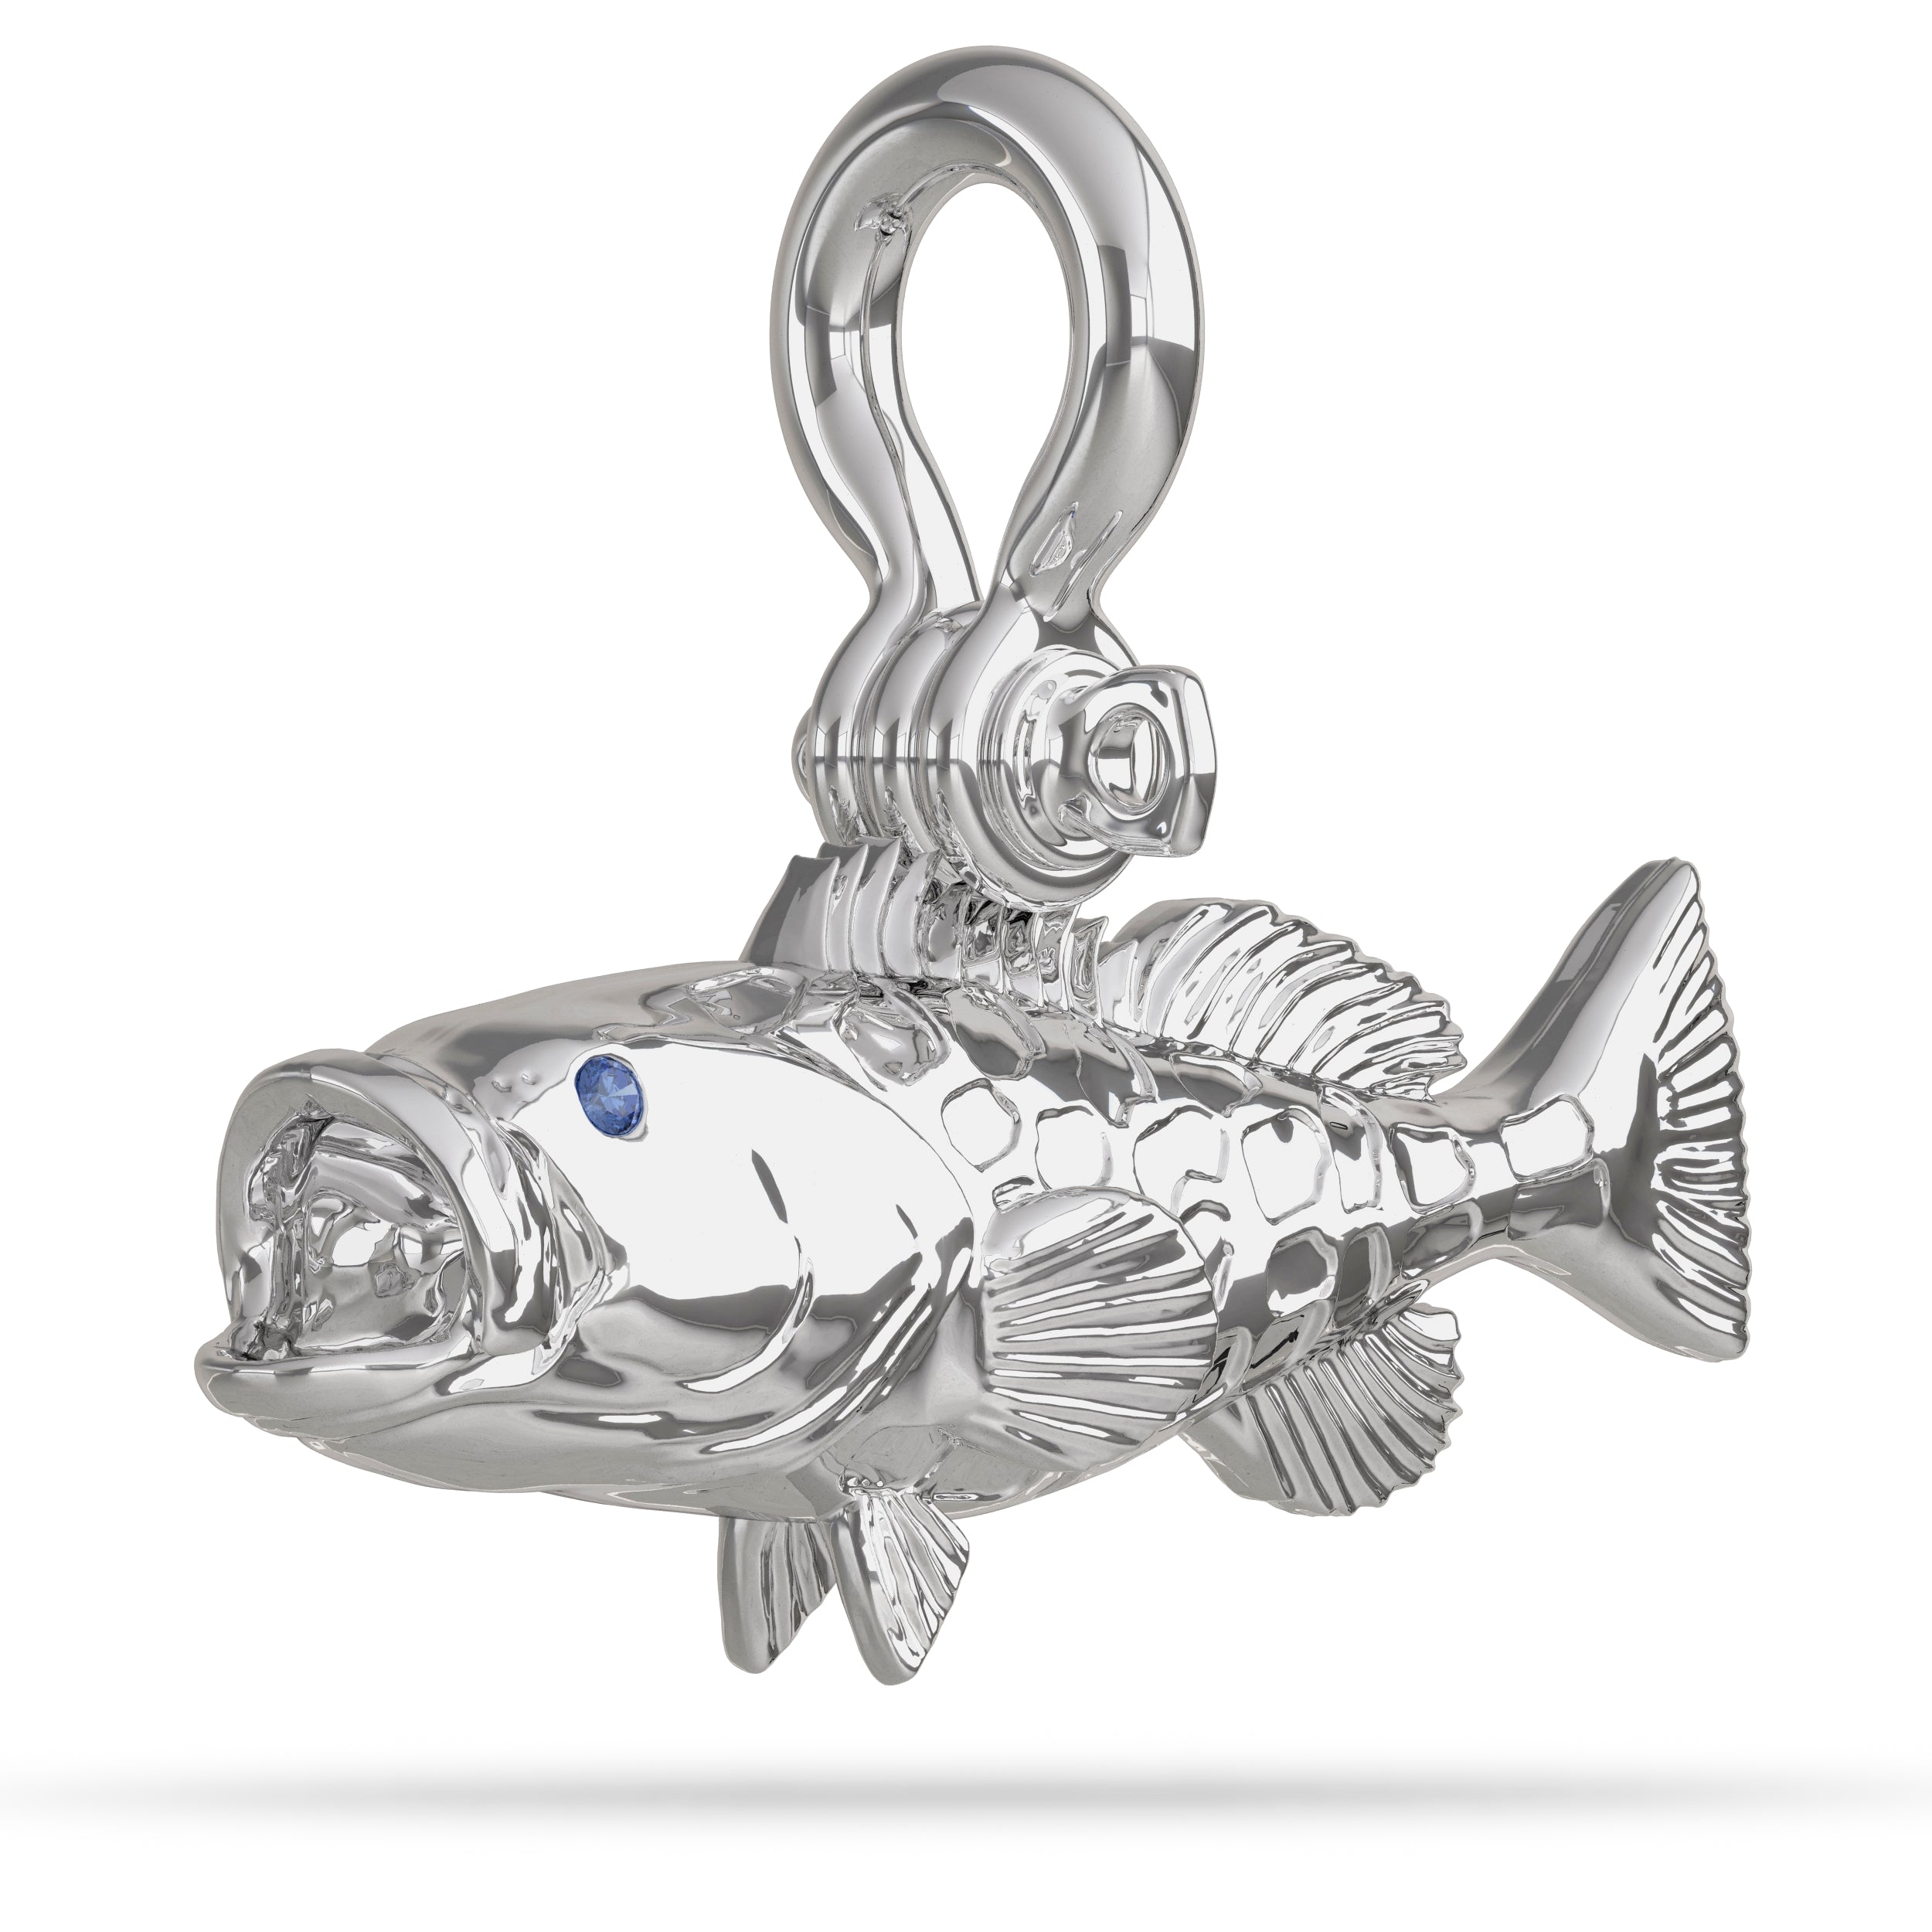 Sterling Silver Black Grouper Fish Pendant With Mouth Open High Polished Mirror Finish With Blue Sapphire Eye And A Mariner Shackle Bail Custom Designed By Nautical Treasure Jewelry In The Florida Keys 